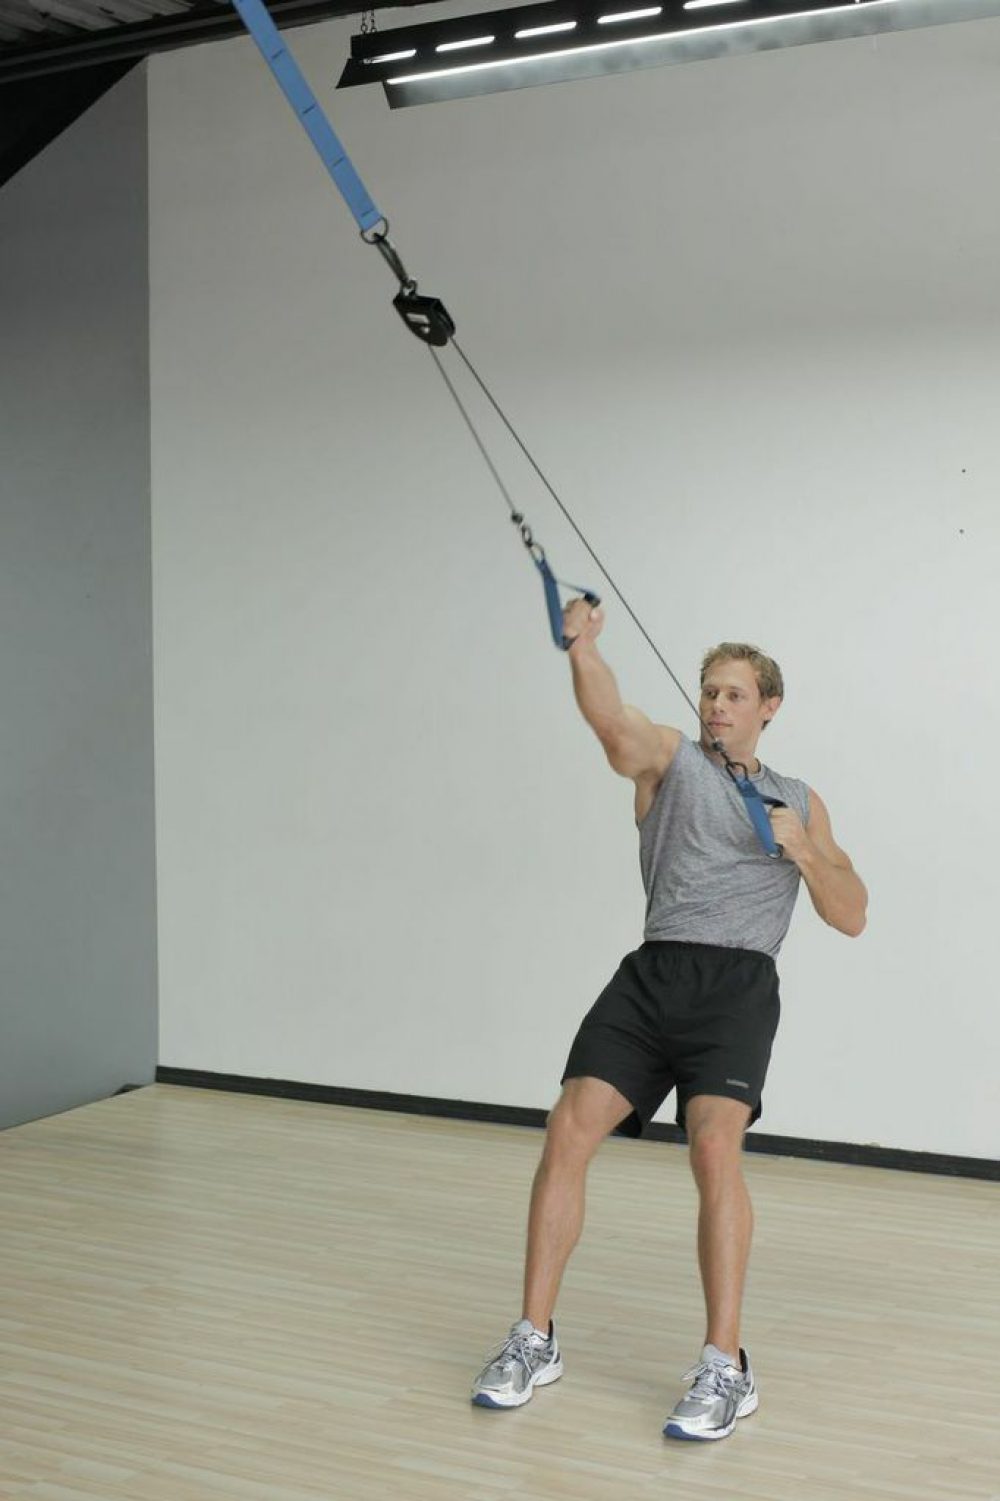 The Human Trainer Rotational Pulley is a bodyweight suspension trainer that provides unlimited range of motion and is designed for all fitness levels.